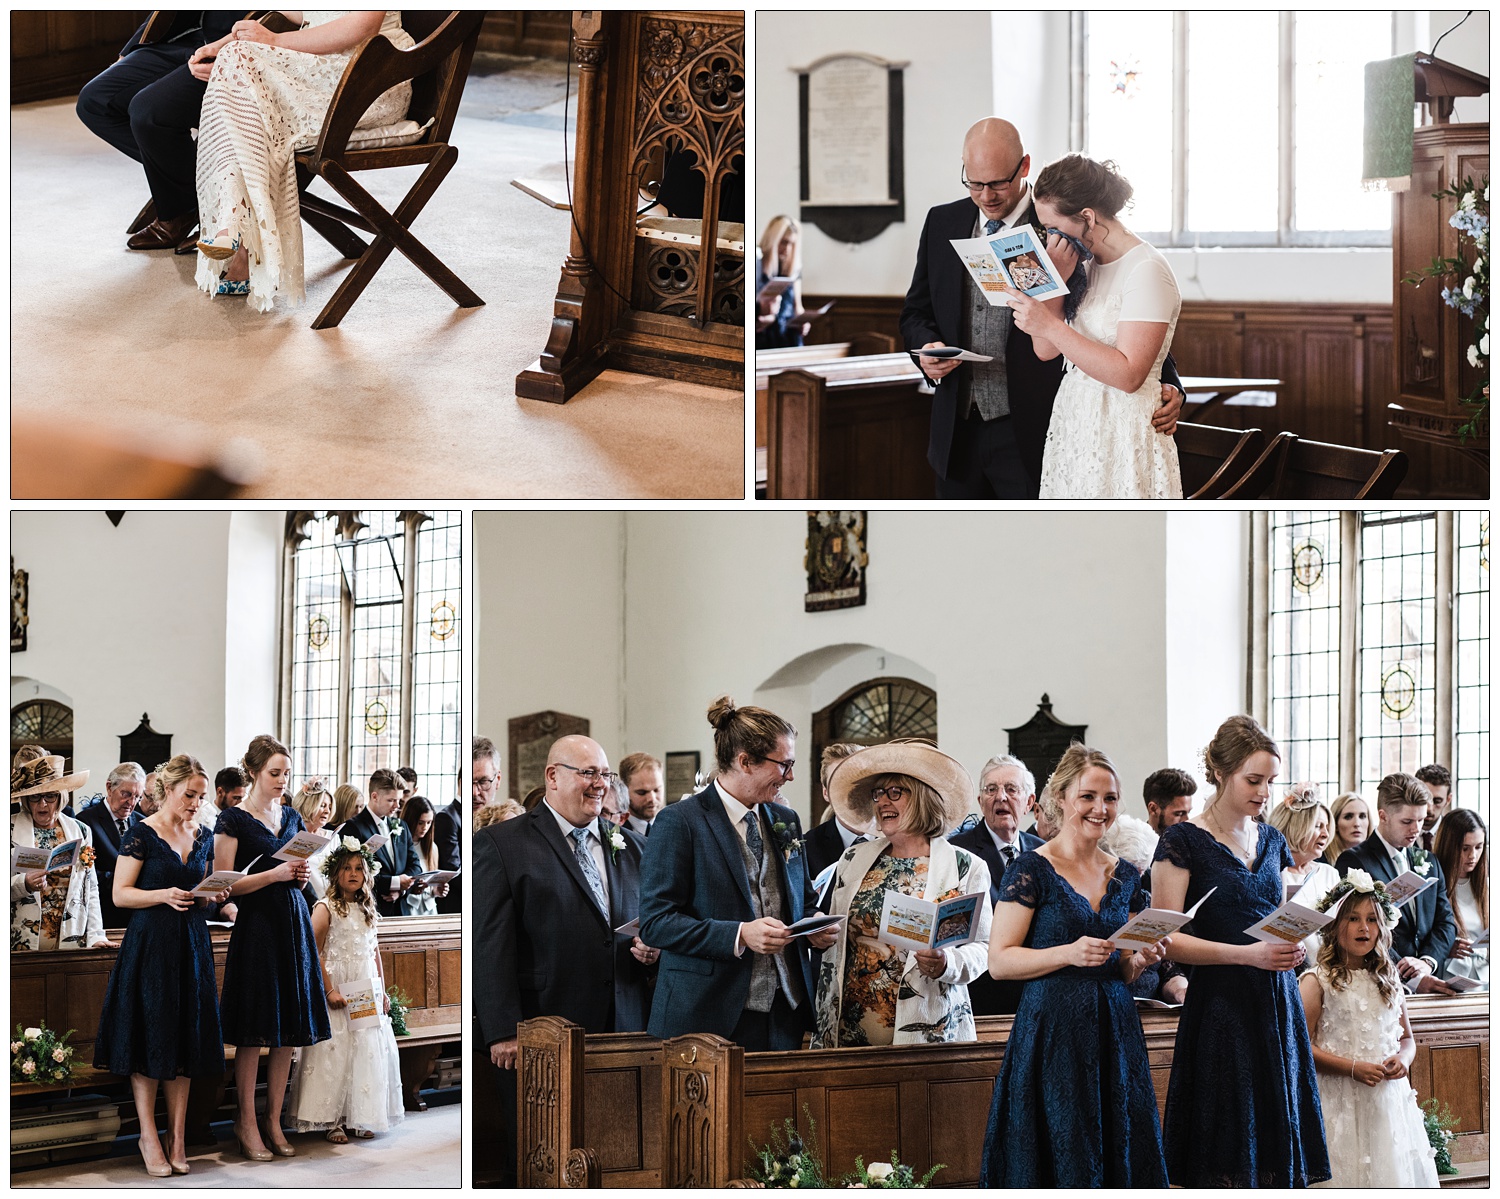 Woman in beige hat in a pew at a wedding smiles at her son. The people are singing. The bridesmaids are at the front.